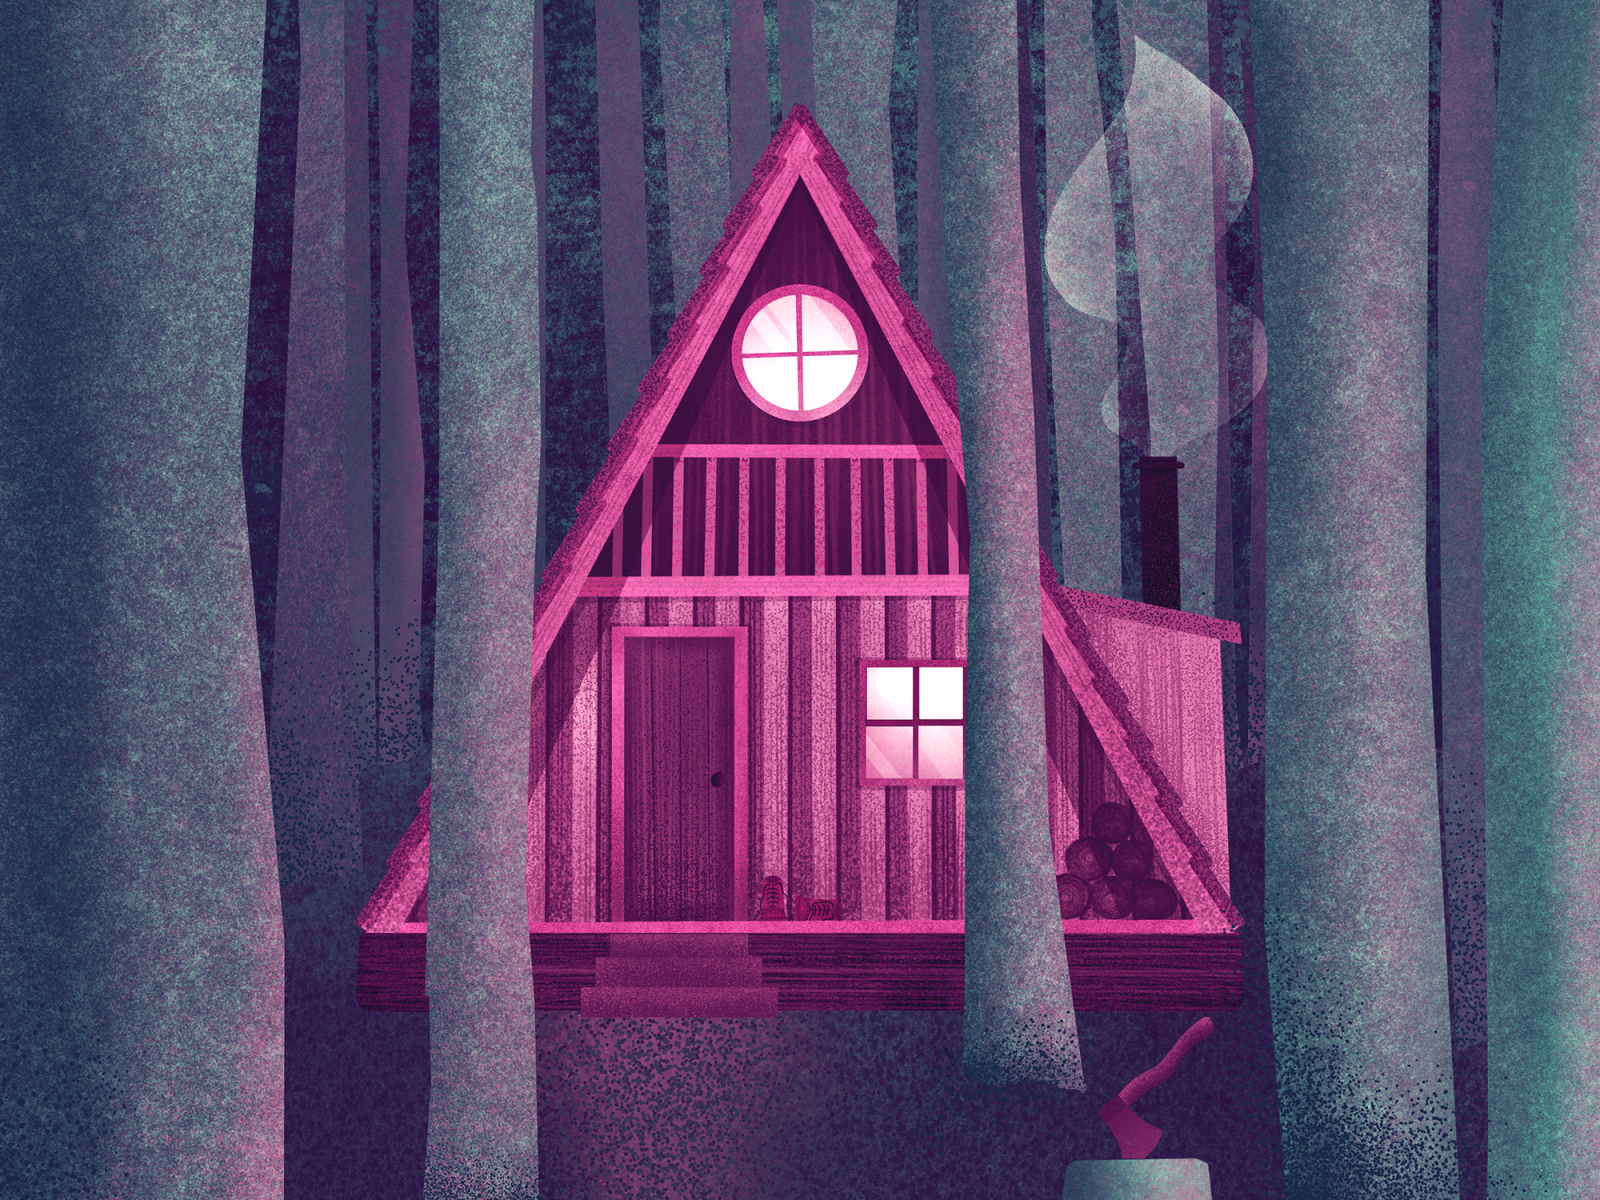 a-little-cabin-in-the-woods-by-emily-robson-on-dribbble